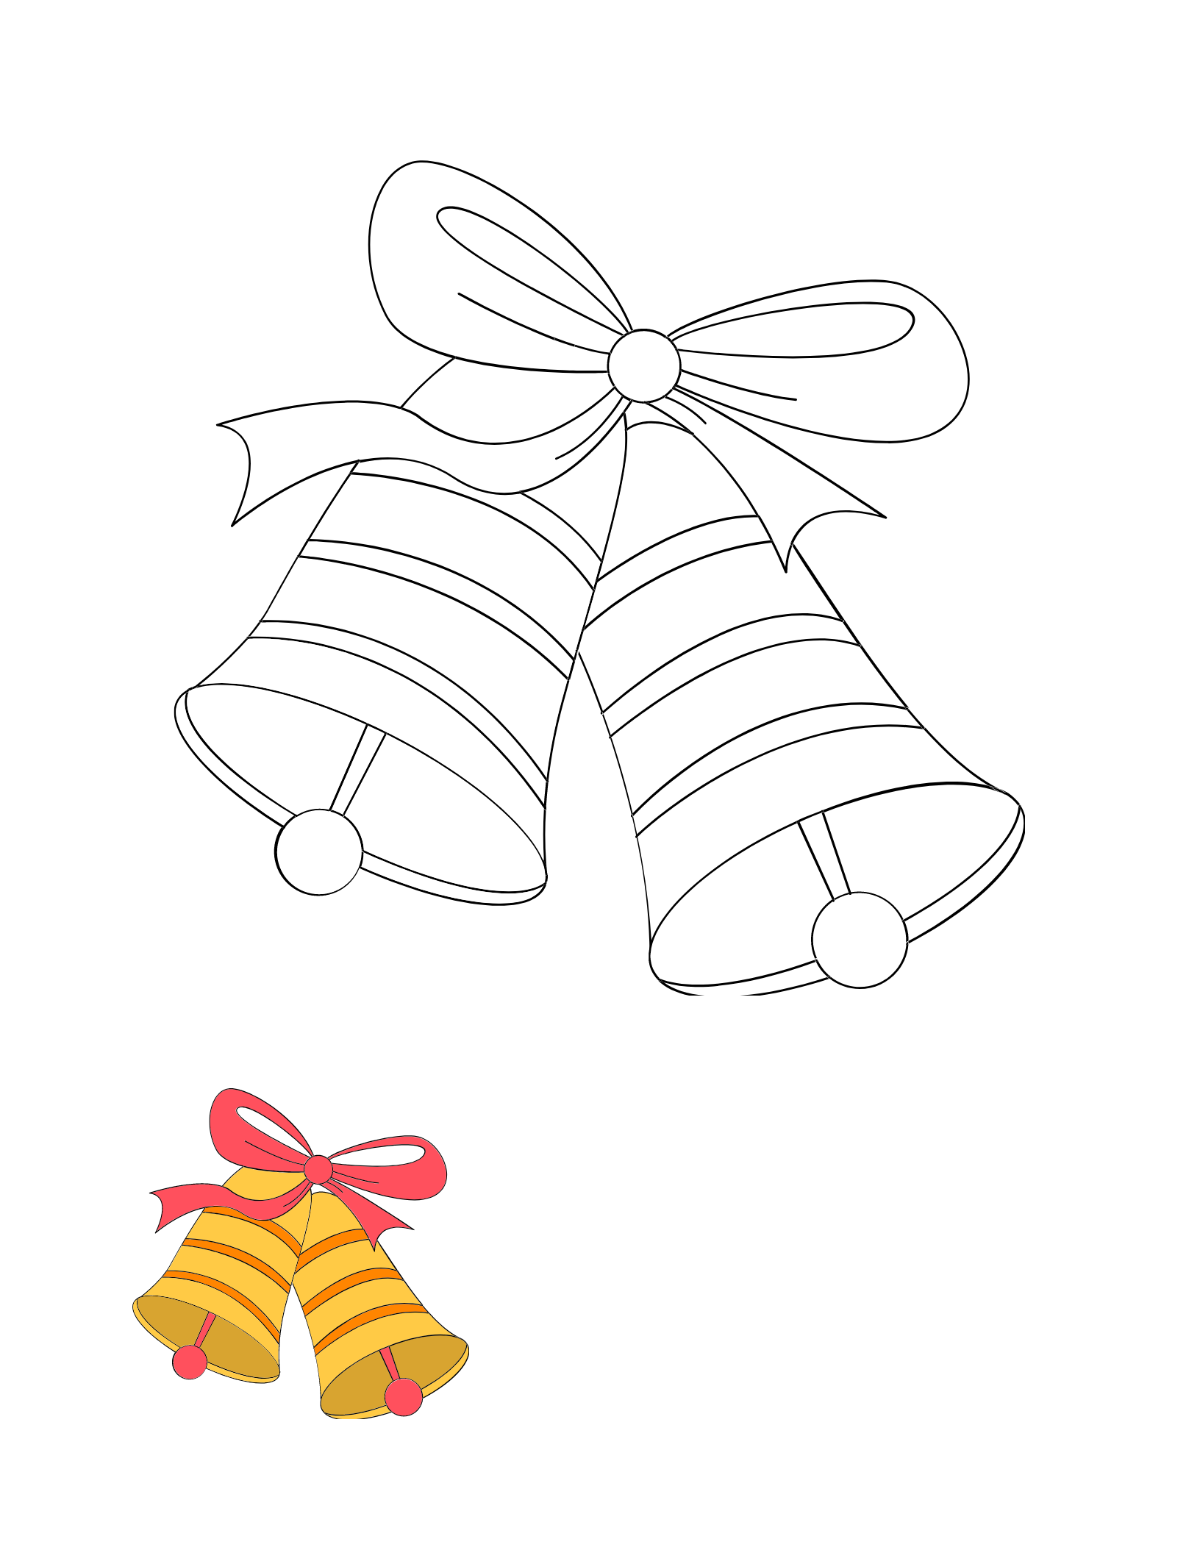 Jingle Bells Coloring Page Template